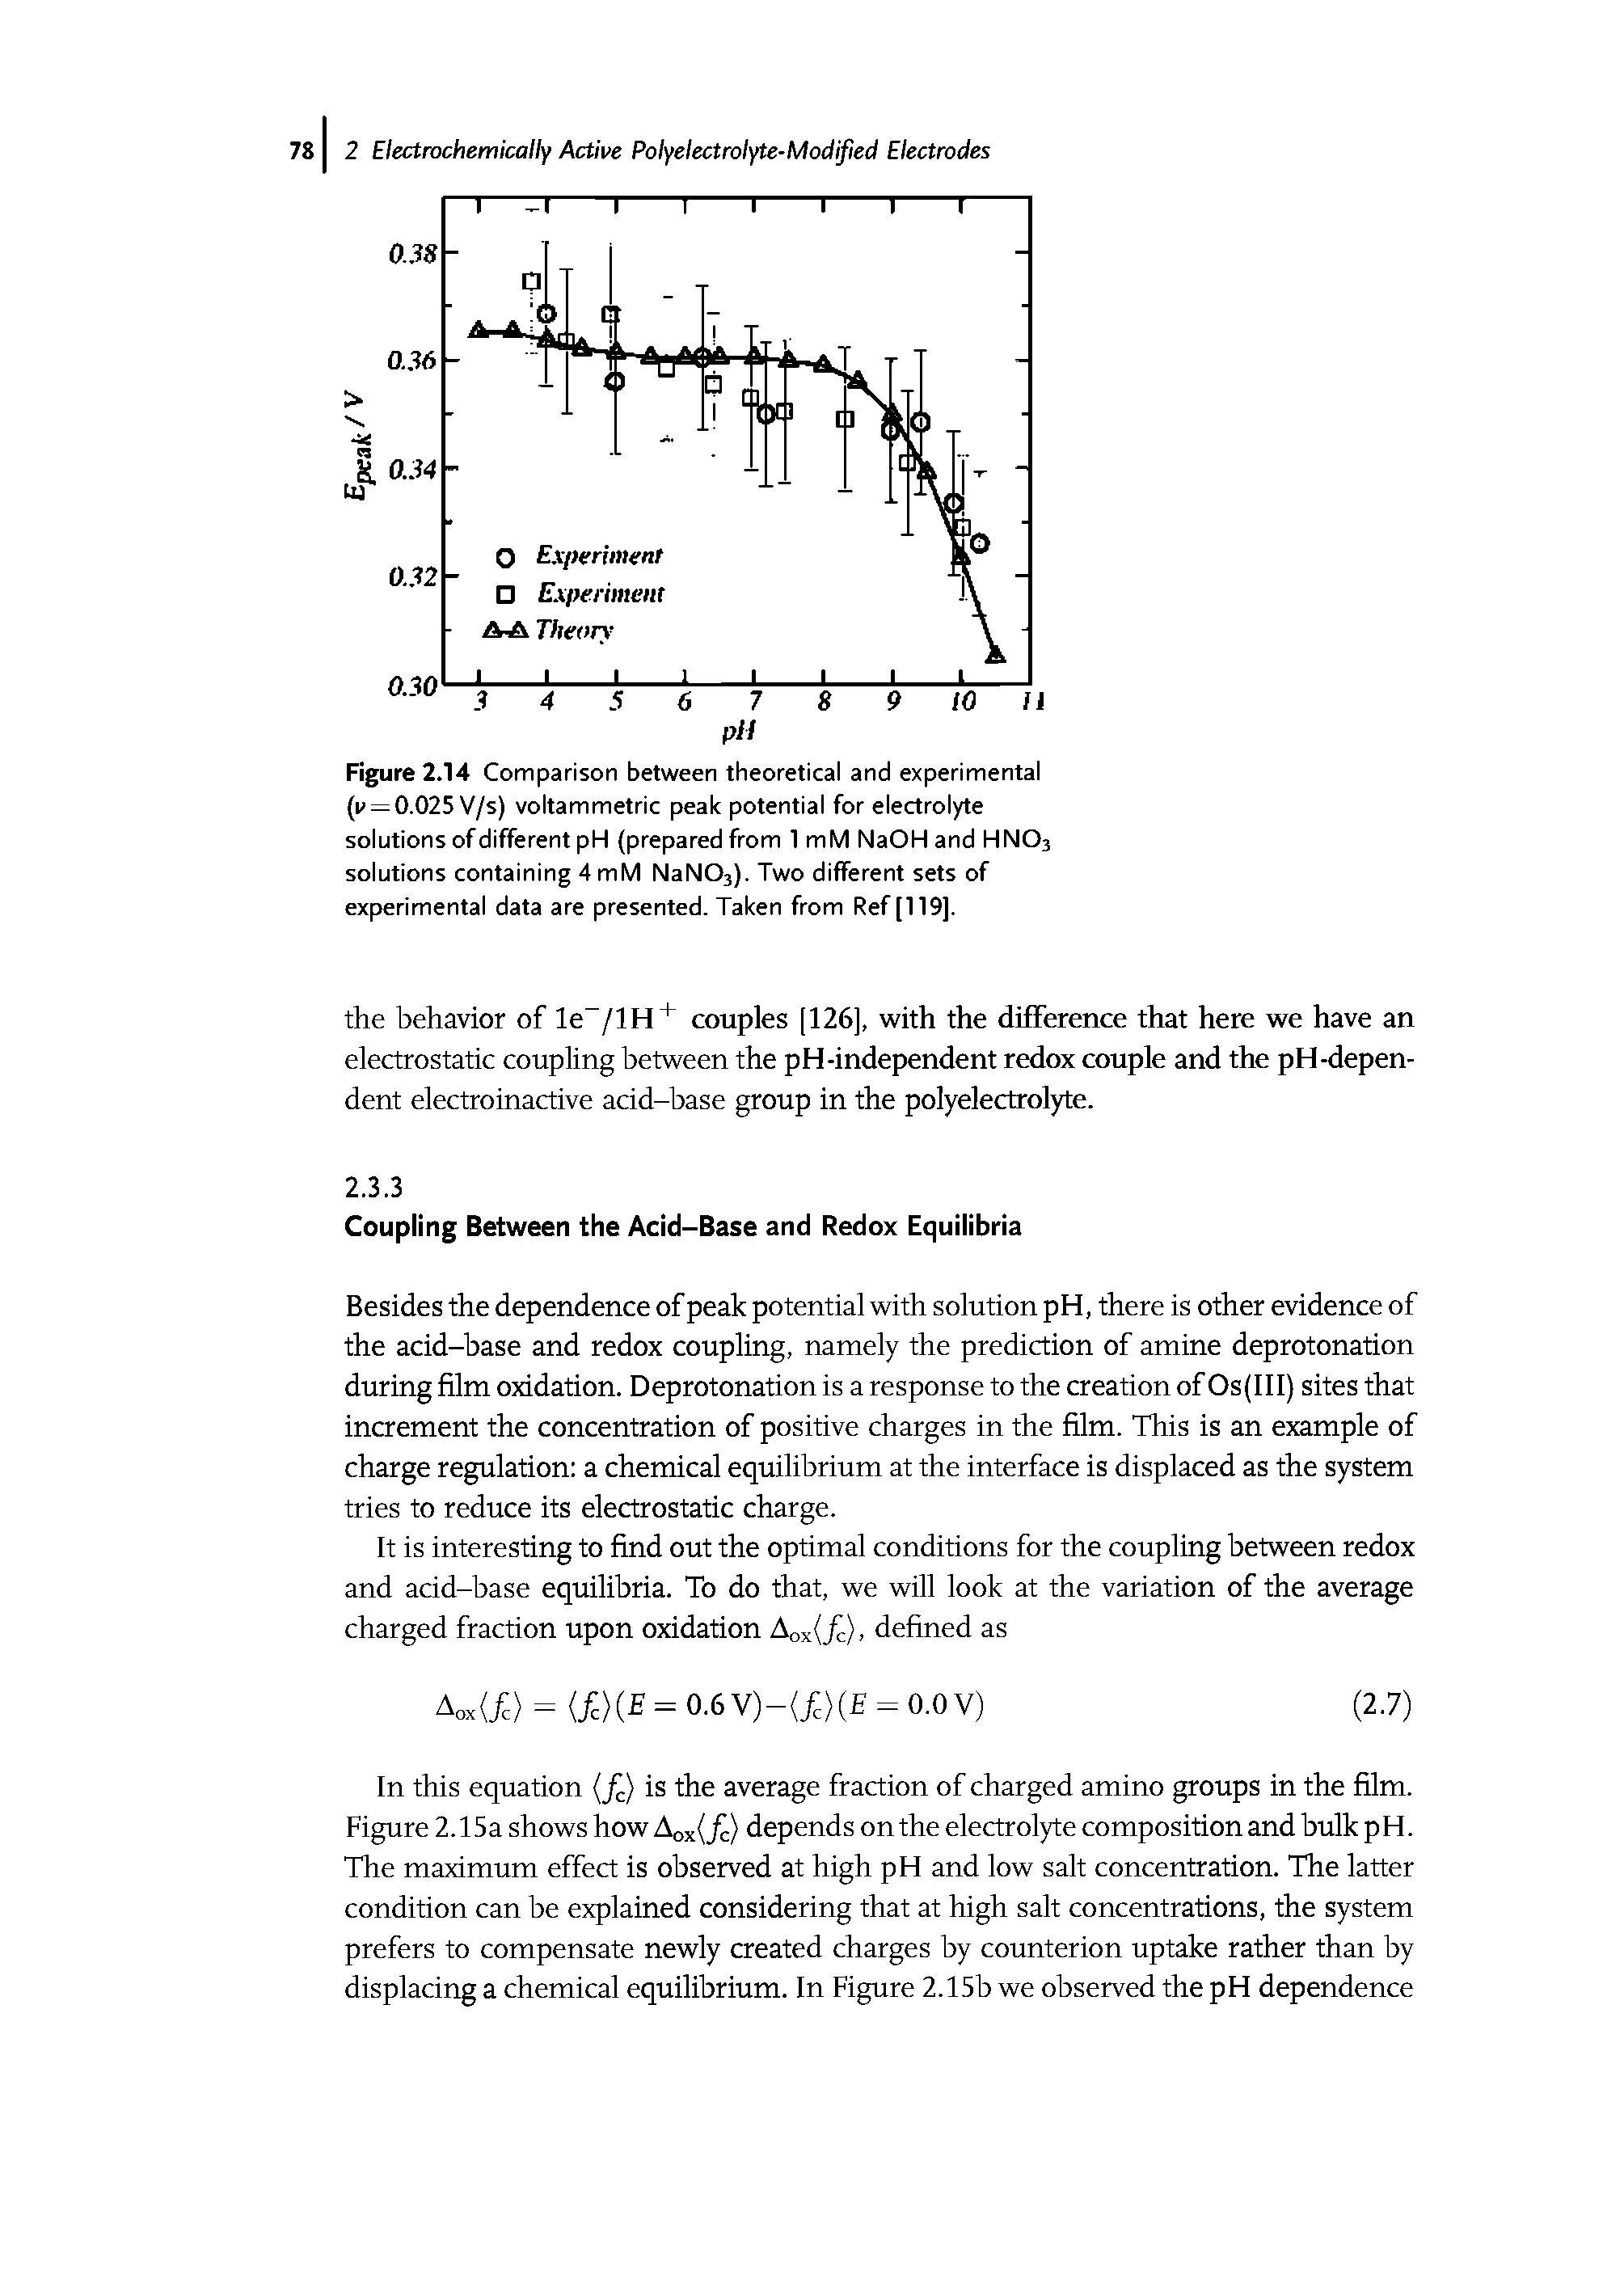 Figure 2.14 Comparison between theoretical and experimental (i = 0.025 V/s) voltammetric peak potential for electrolyte solutions of different pH (prepared from 1 mM NaOH and HNO3 solutions containing 4 mM NaN03). Two different sets of experimental data are presented. Taken from Ref [119].